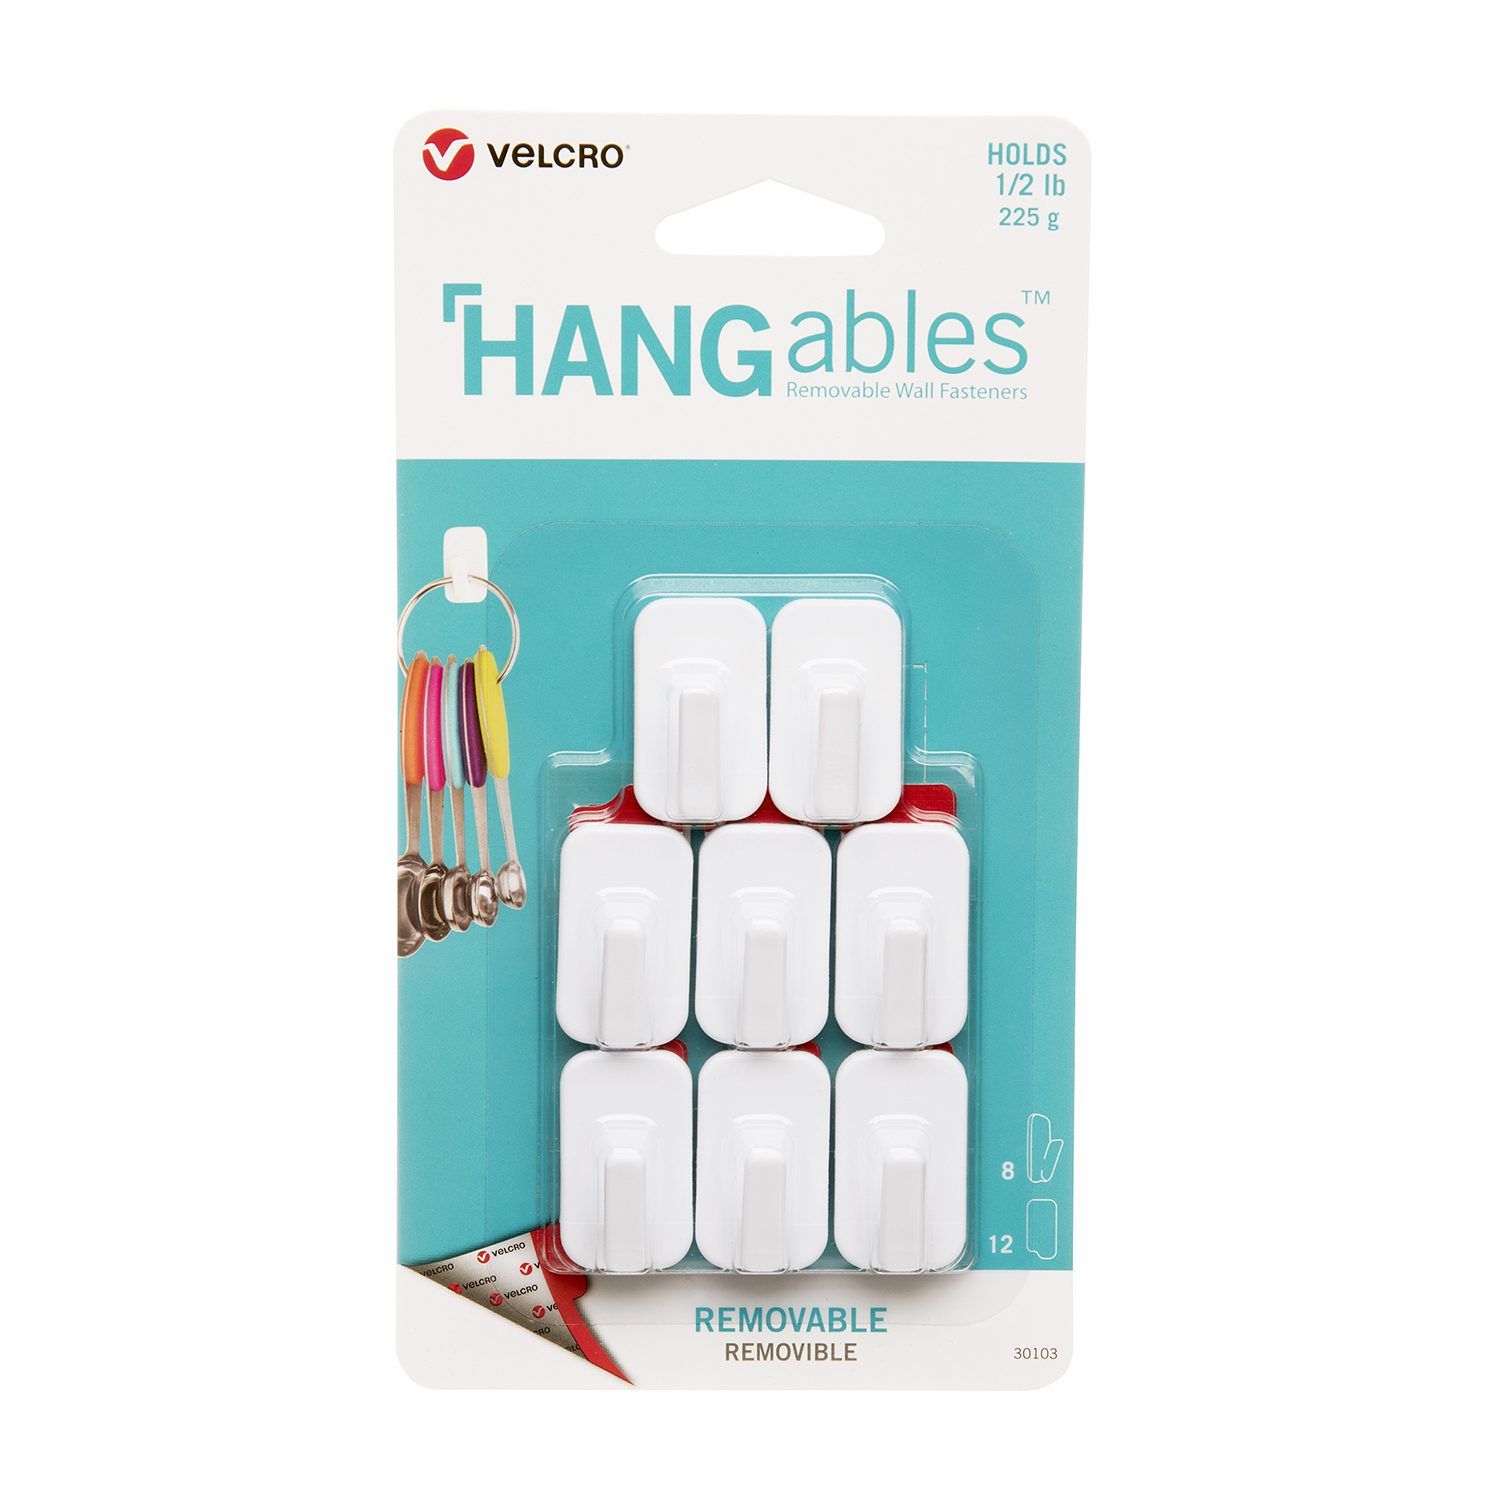  VELCRO Brand HANGables Removable Wall Fasteners, Strong  Adhesive Hold, Up to 7.5 kg / 16 ½ lb (per set of 4)